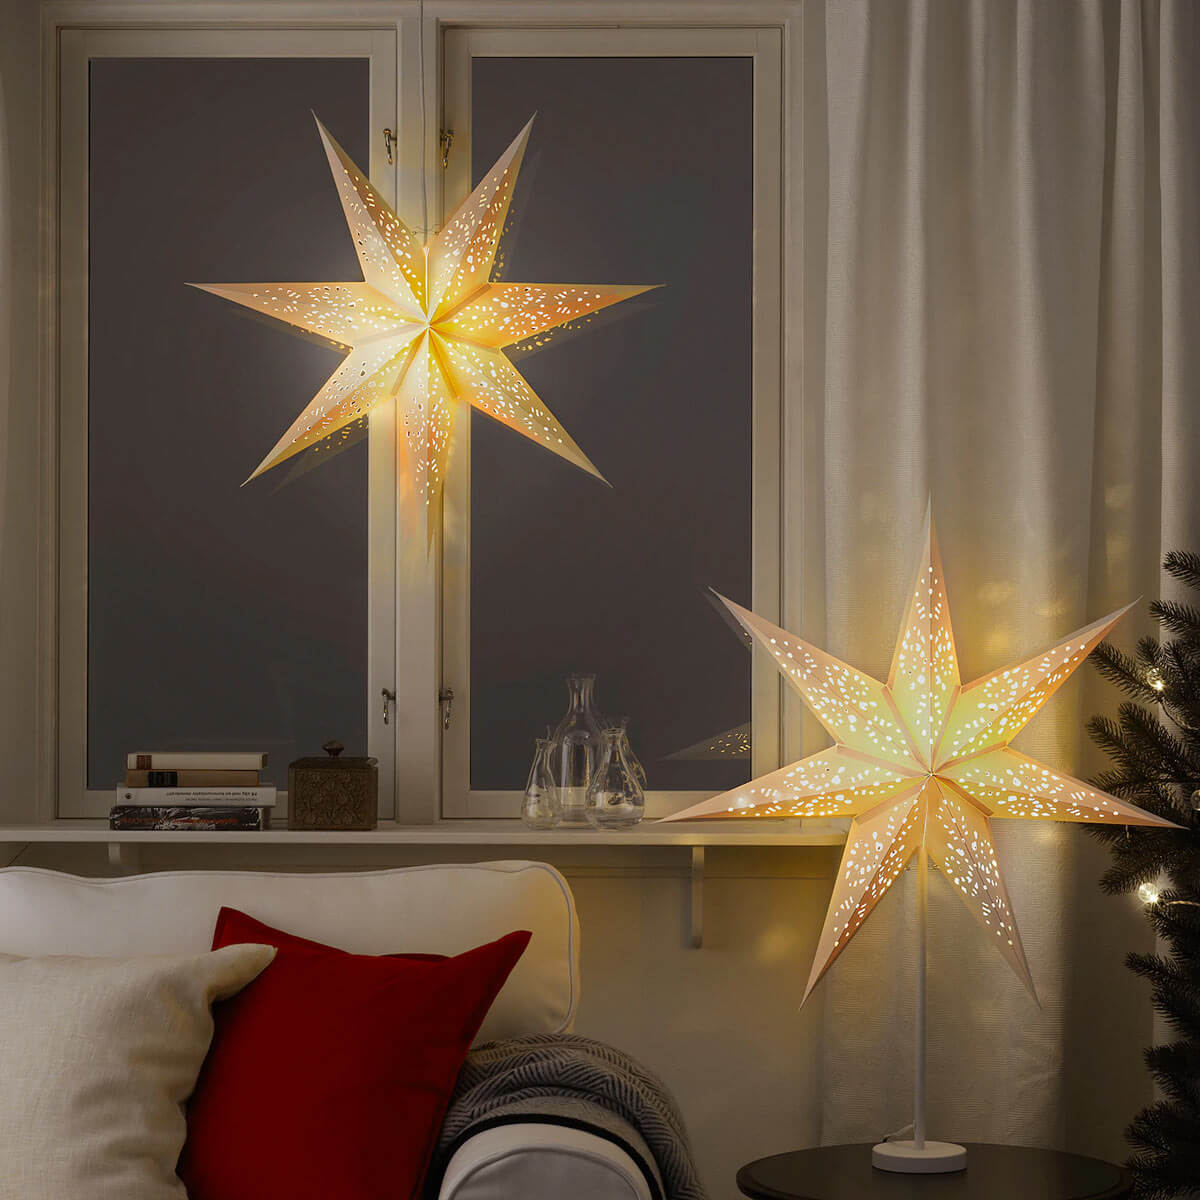 IKEA light decorations for hanging (1)